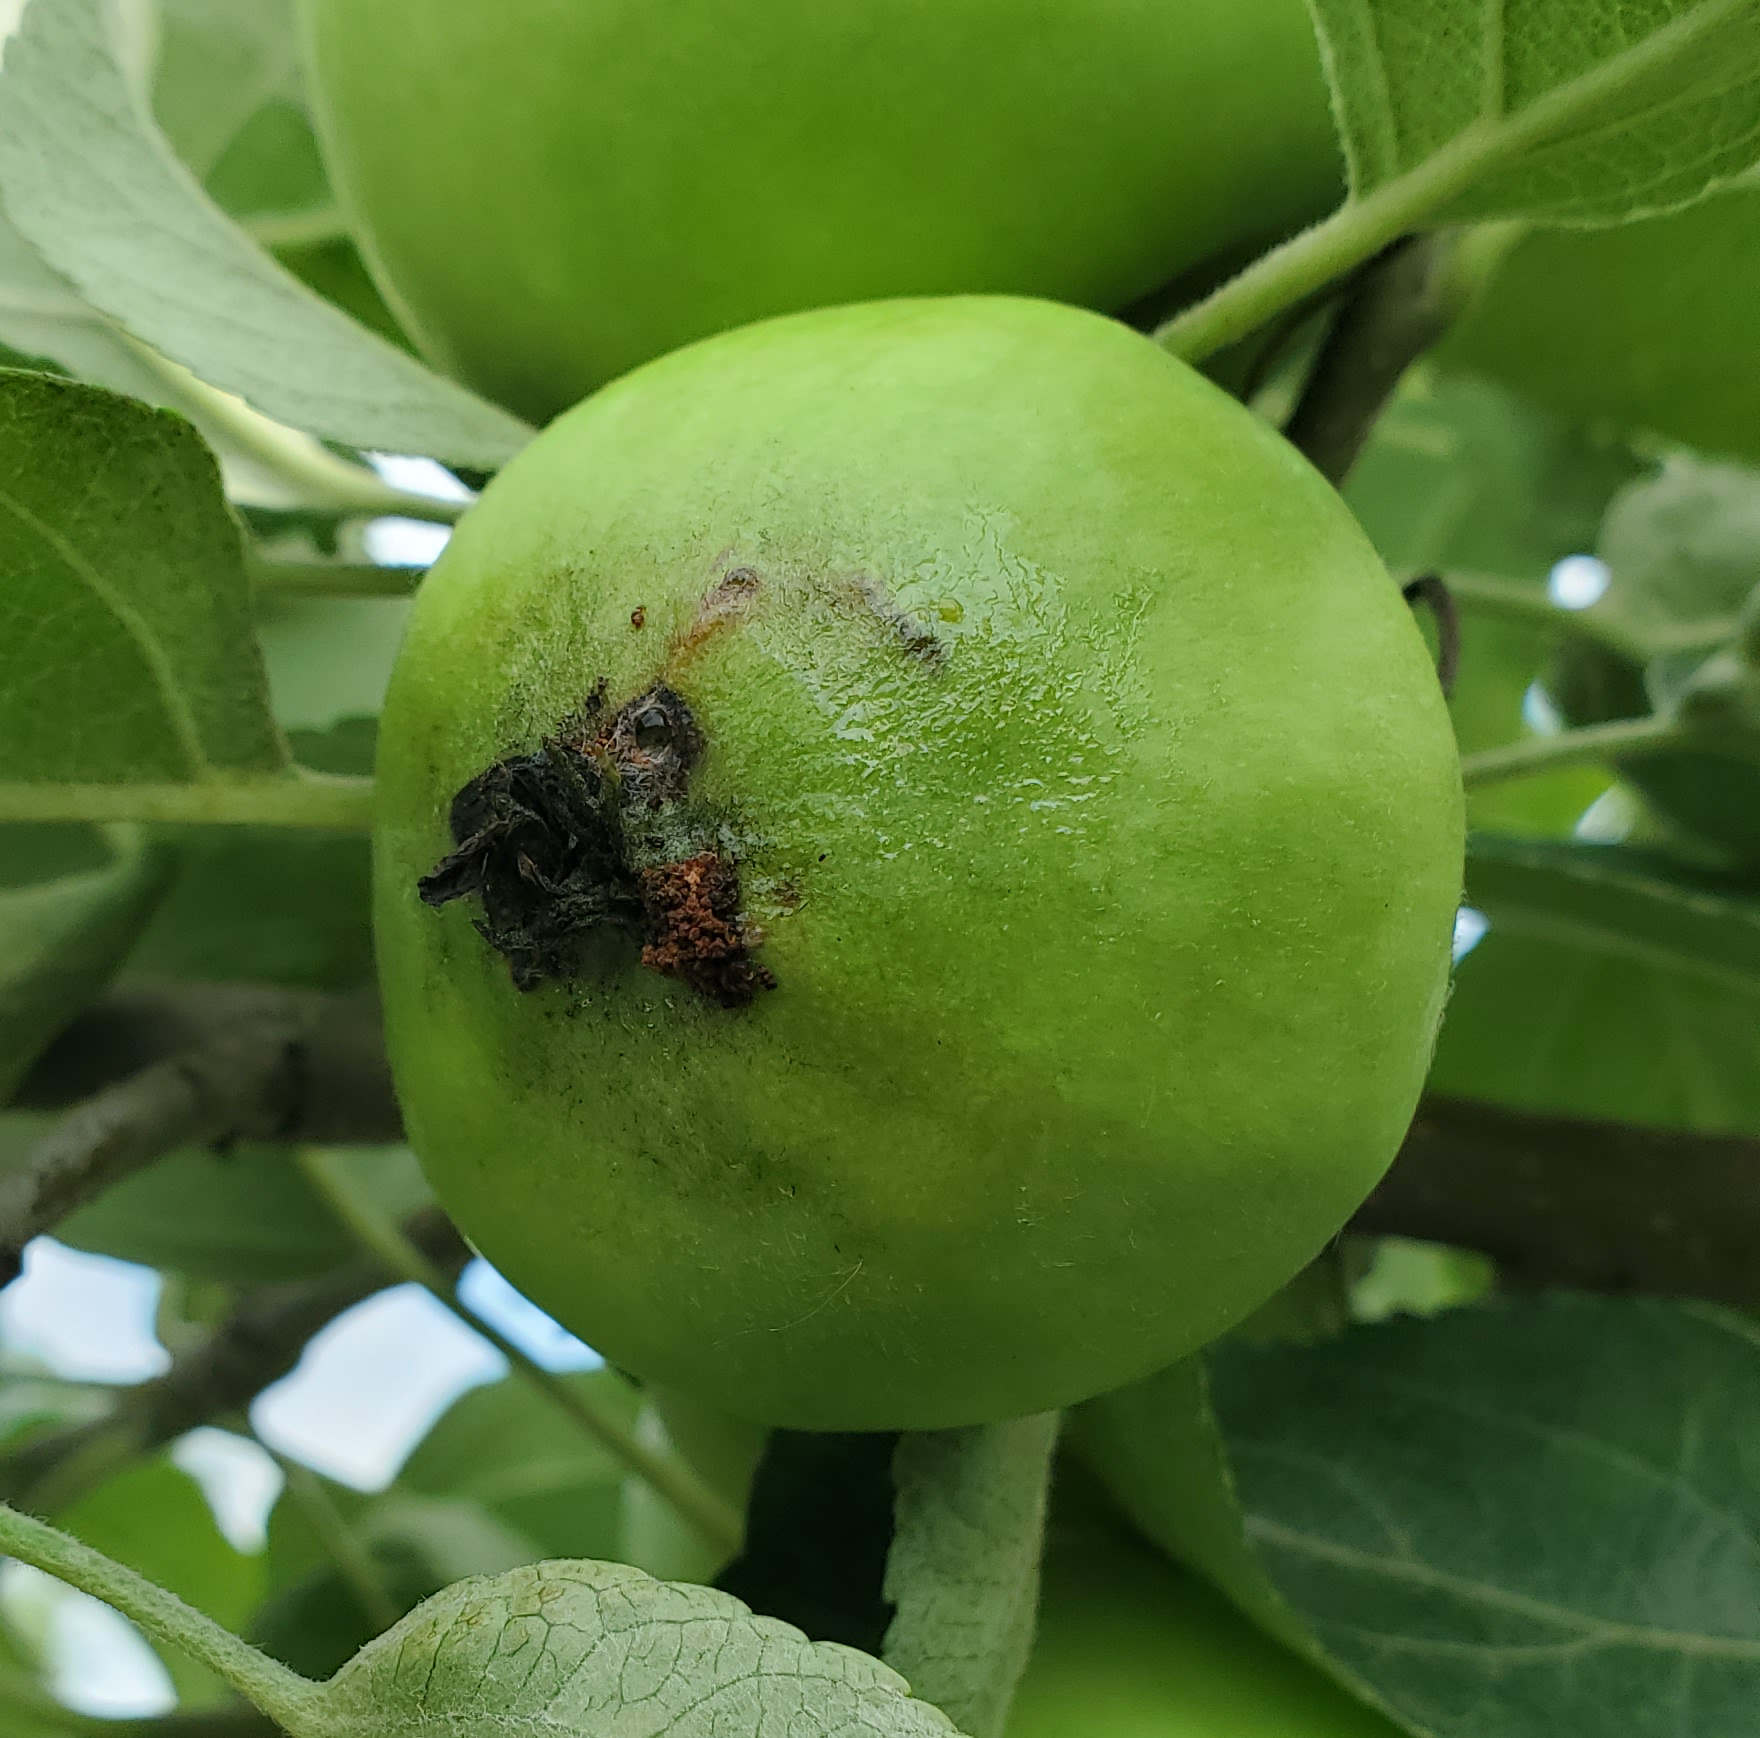 Holes in apple from codling moth feeding.